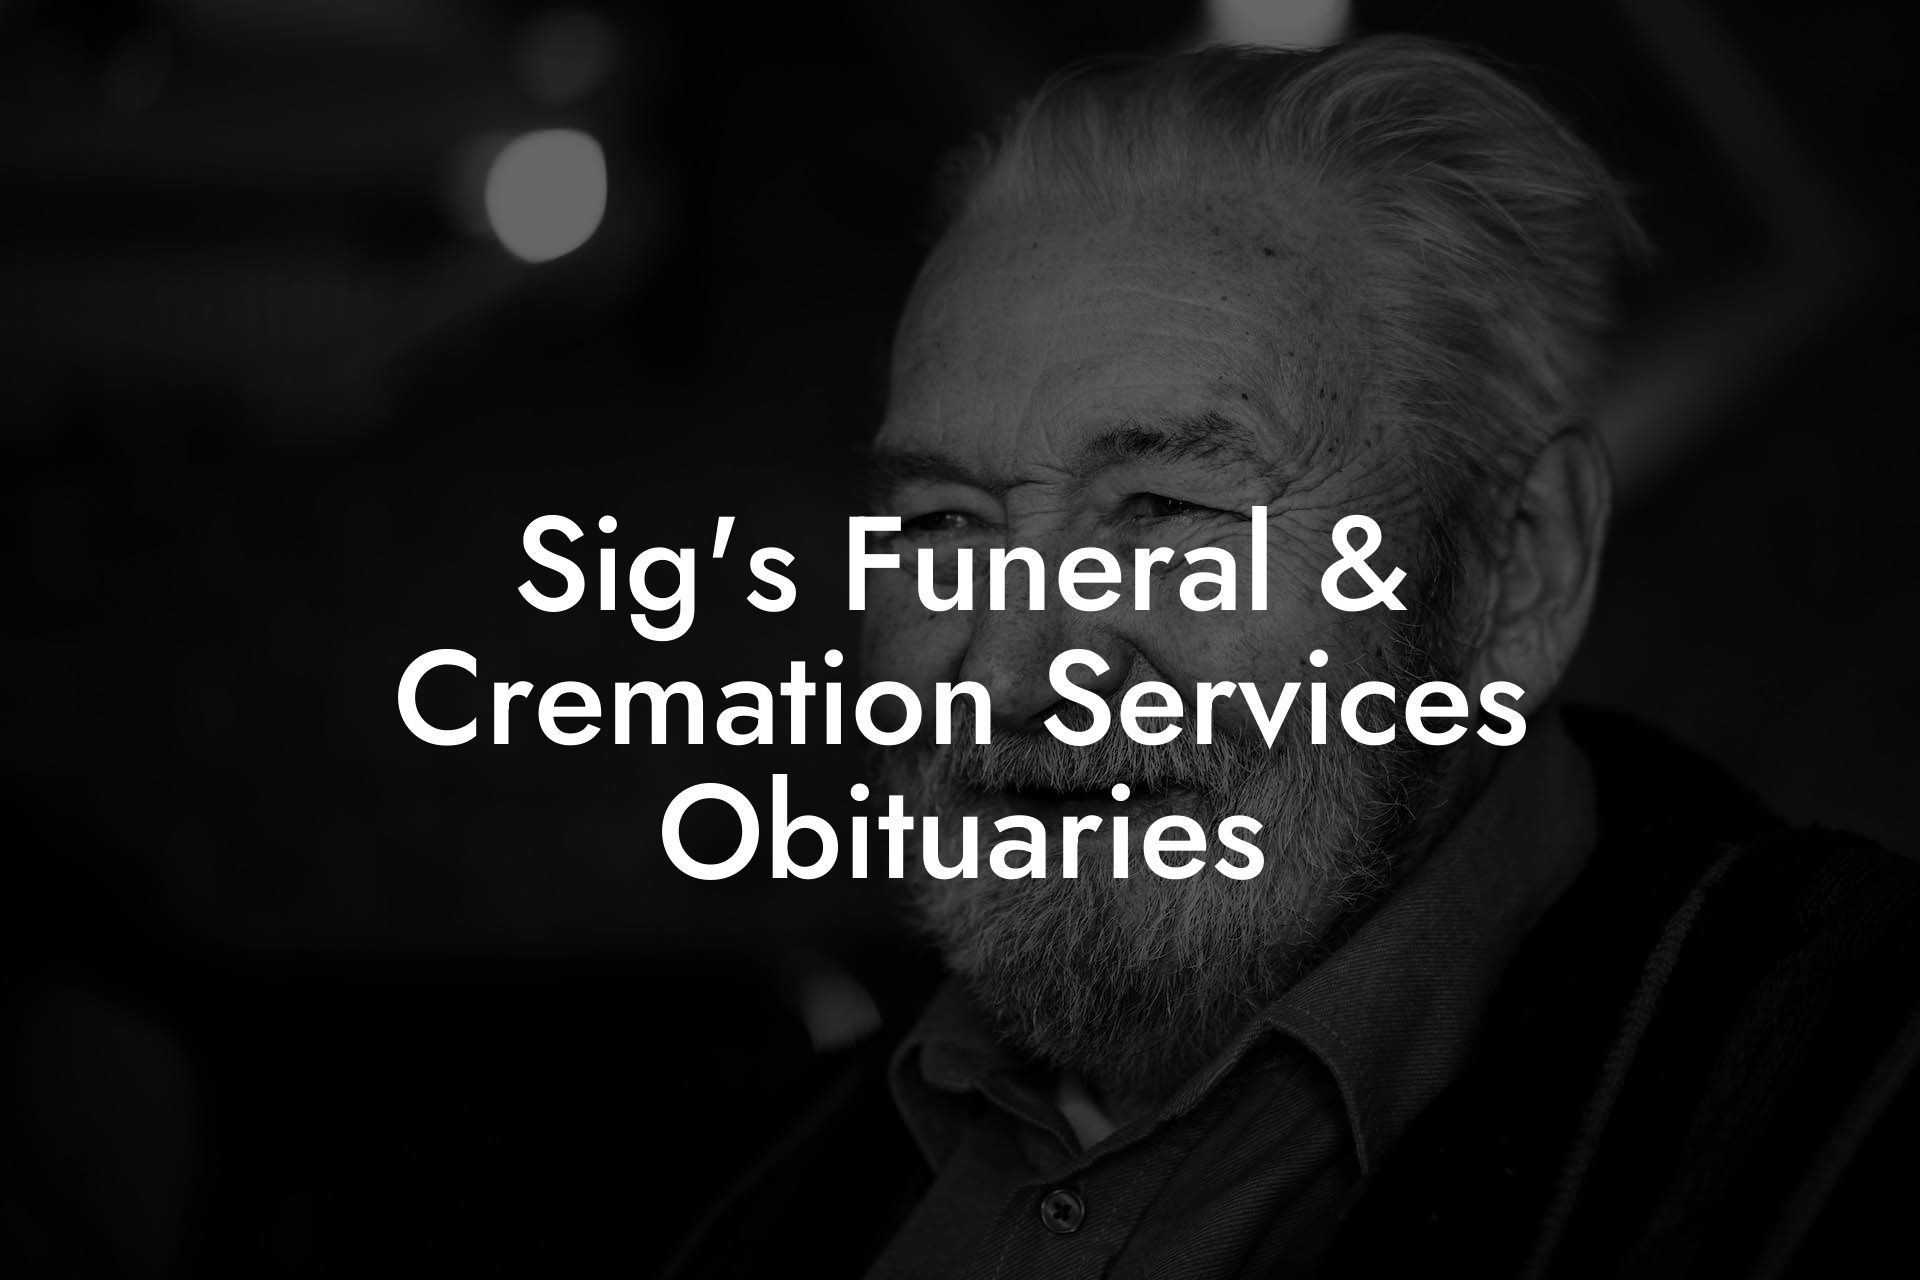 Sig's Funeral & Cremation Services Obituaries